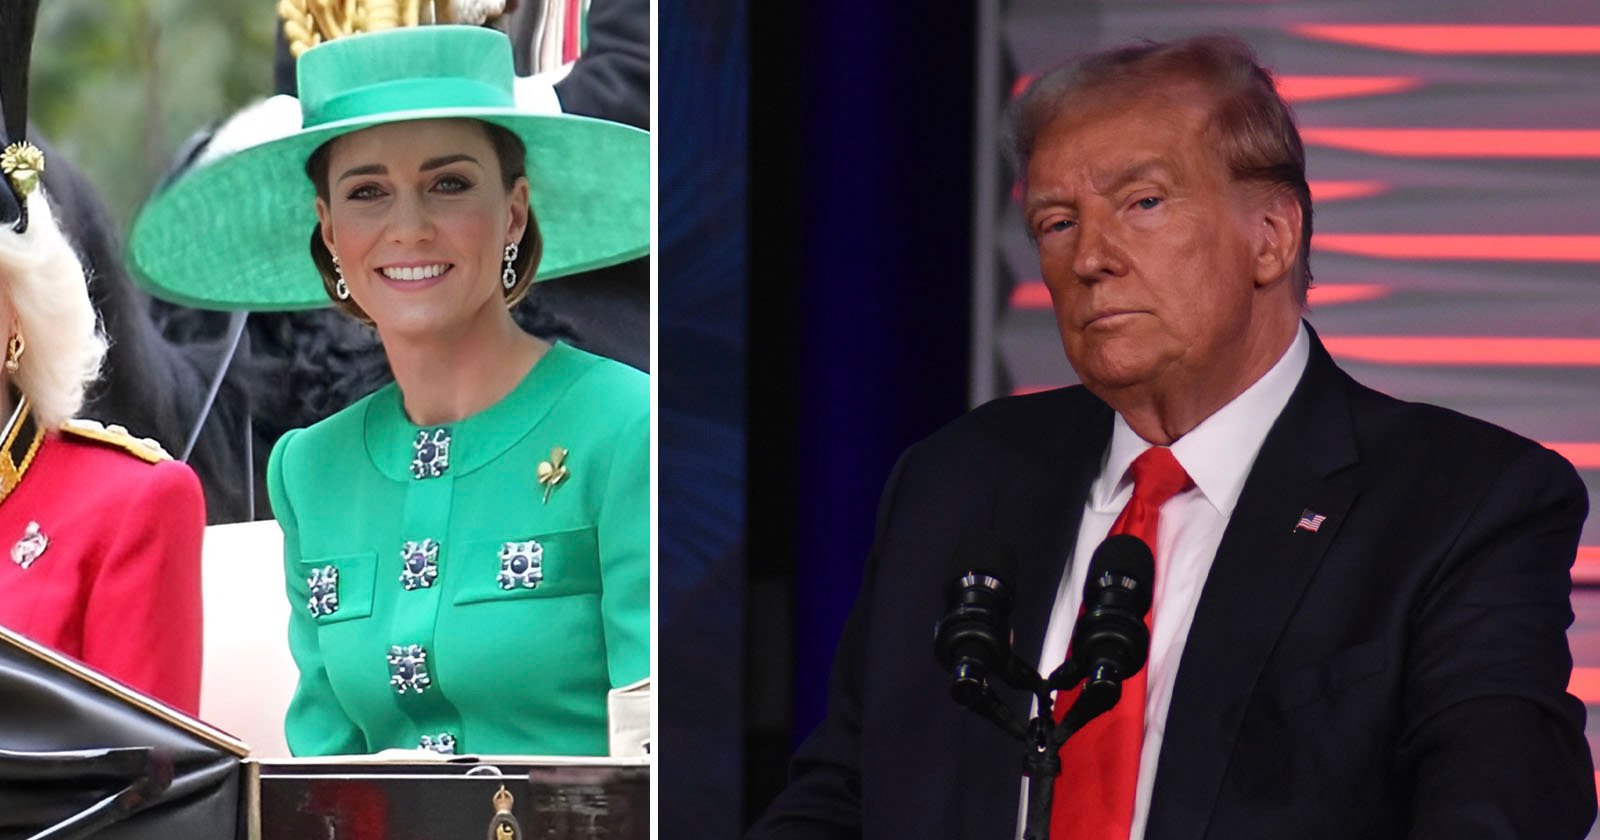 Trump Says Kate Middleton Doctoring Her Photo Shouldnt Be a Big Deal